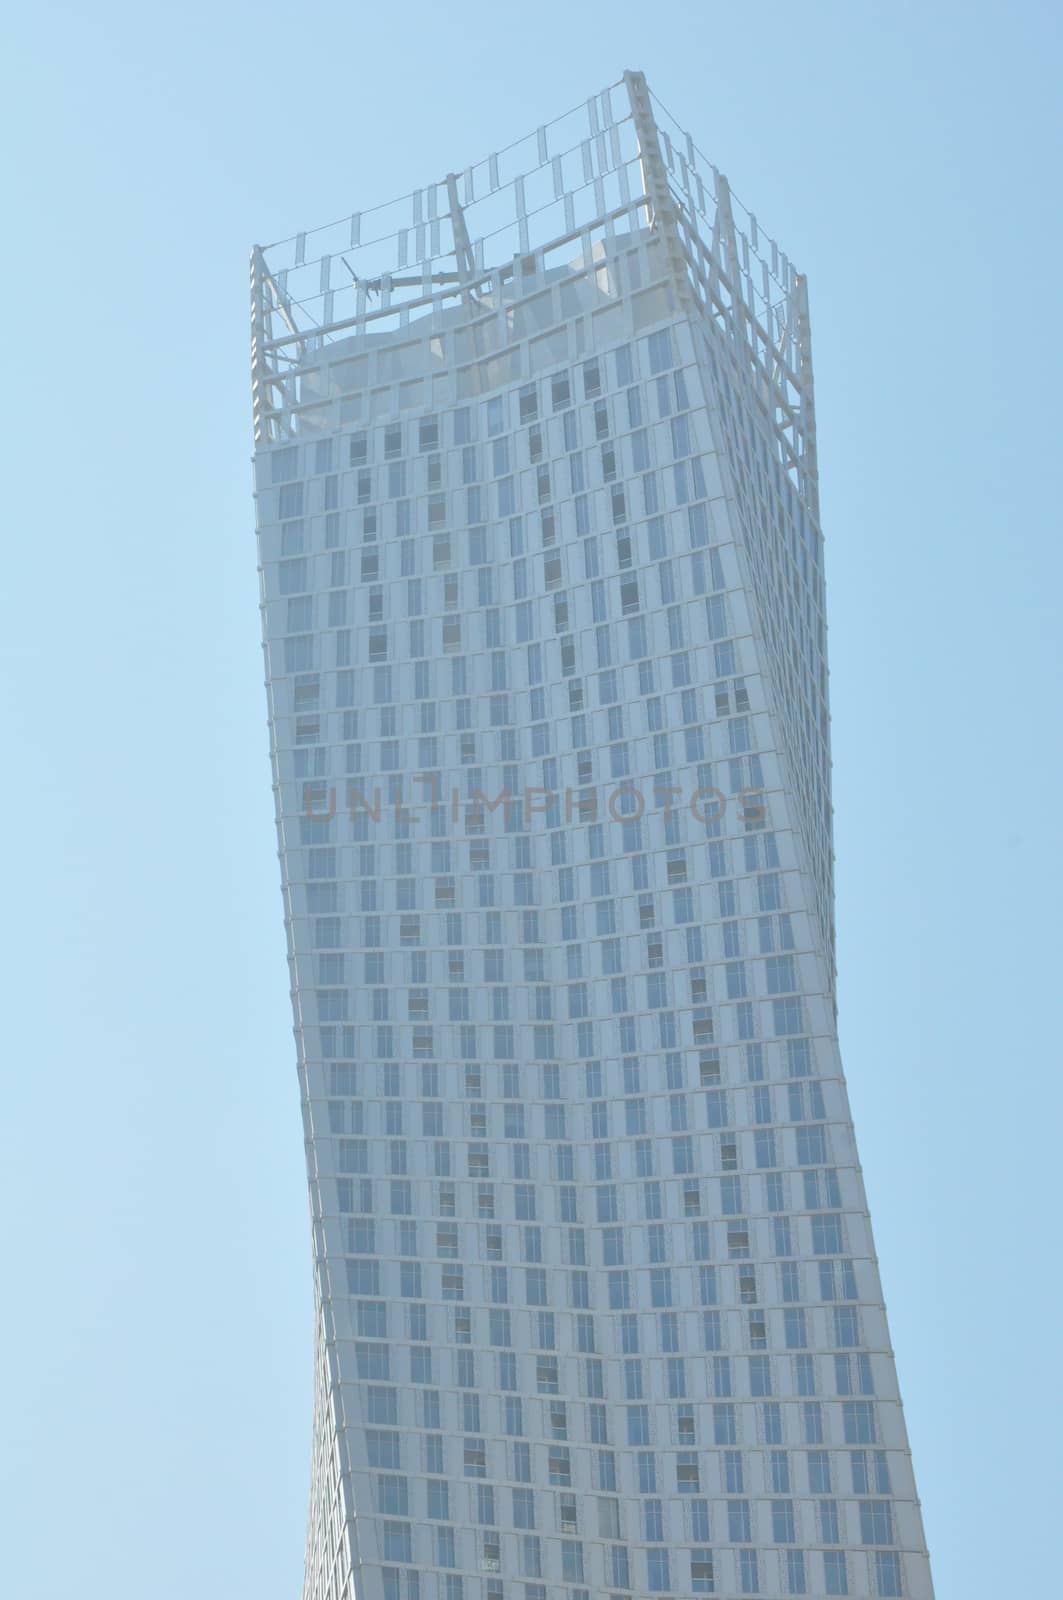 Cayan Tower at Dubai Marina in Dubai, UAE. Also known as Infinity Tower, it is the world's tallest high rise building with a twist of 90 degrees.